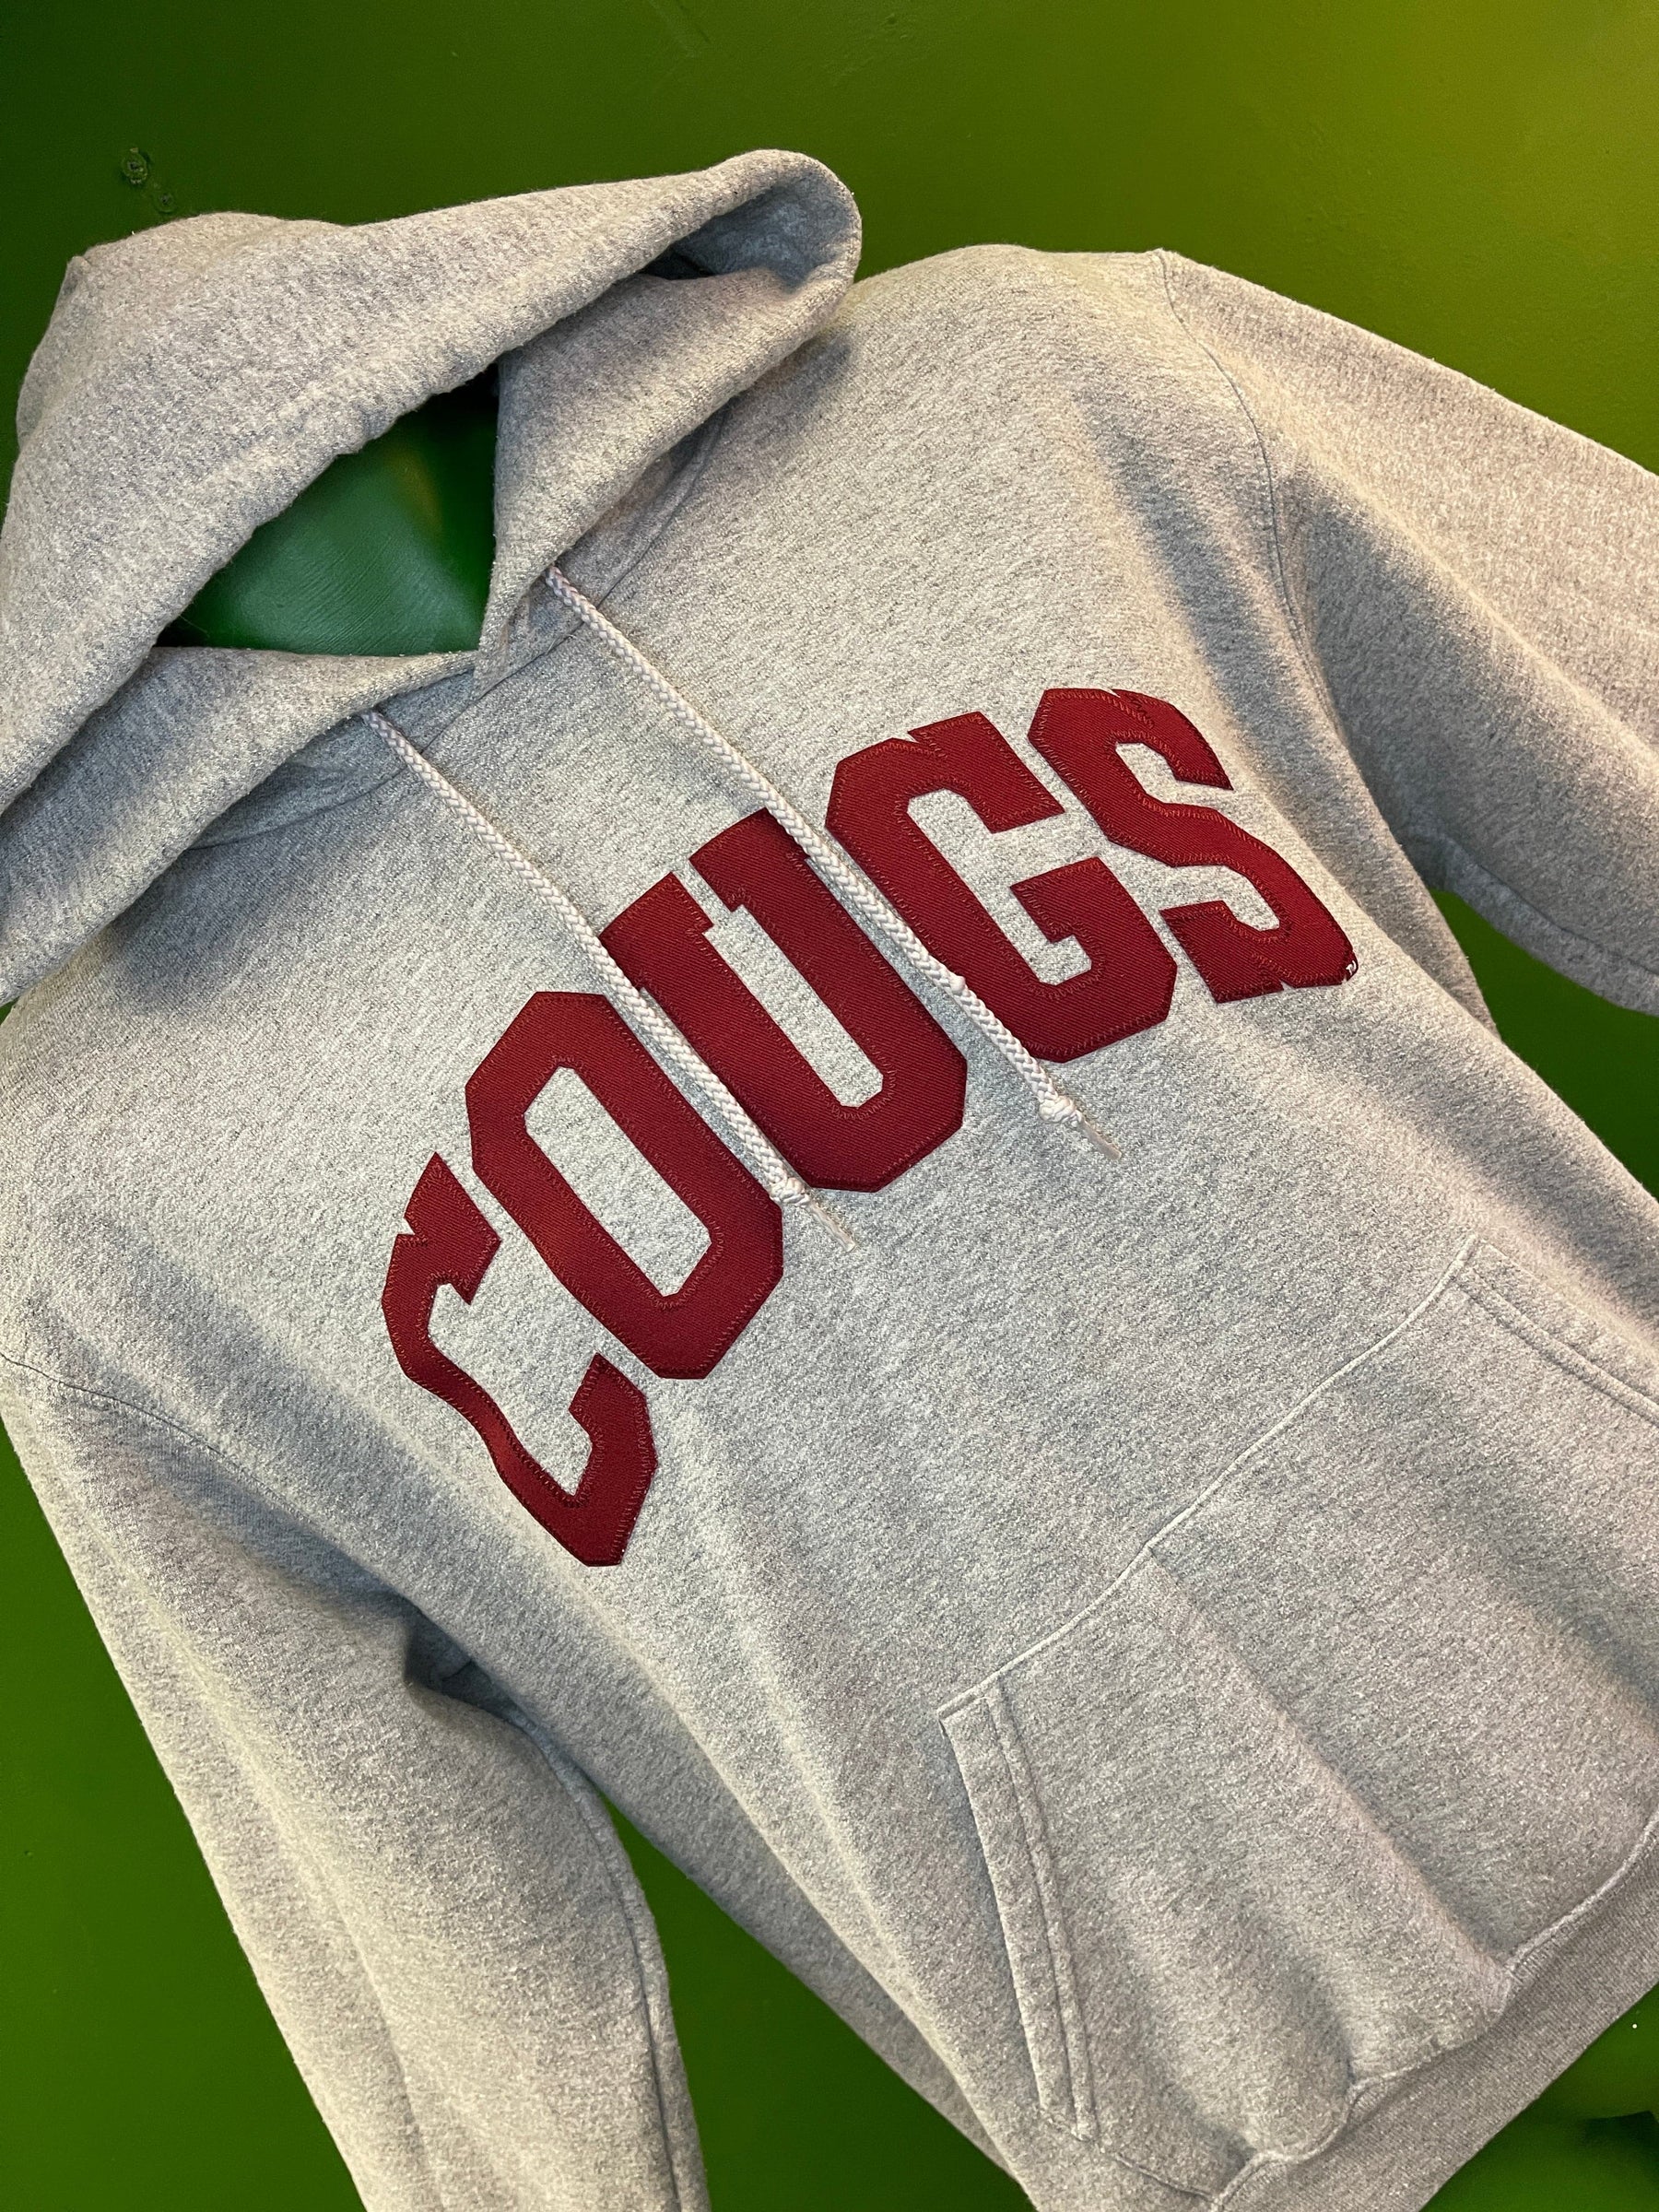 NCAA Washington State Cougars Champion Stitched Pullover Hoodie Men's Small